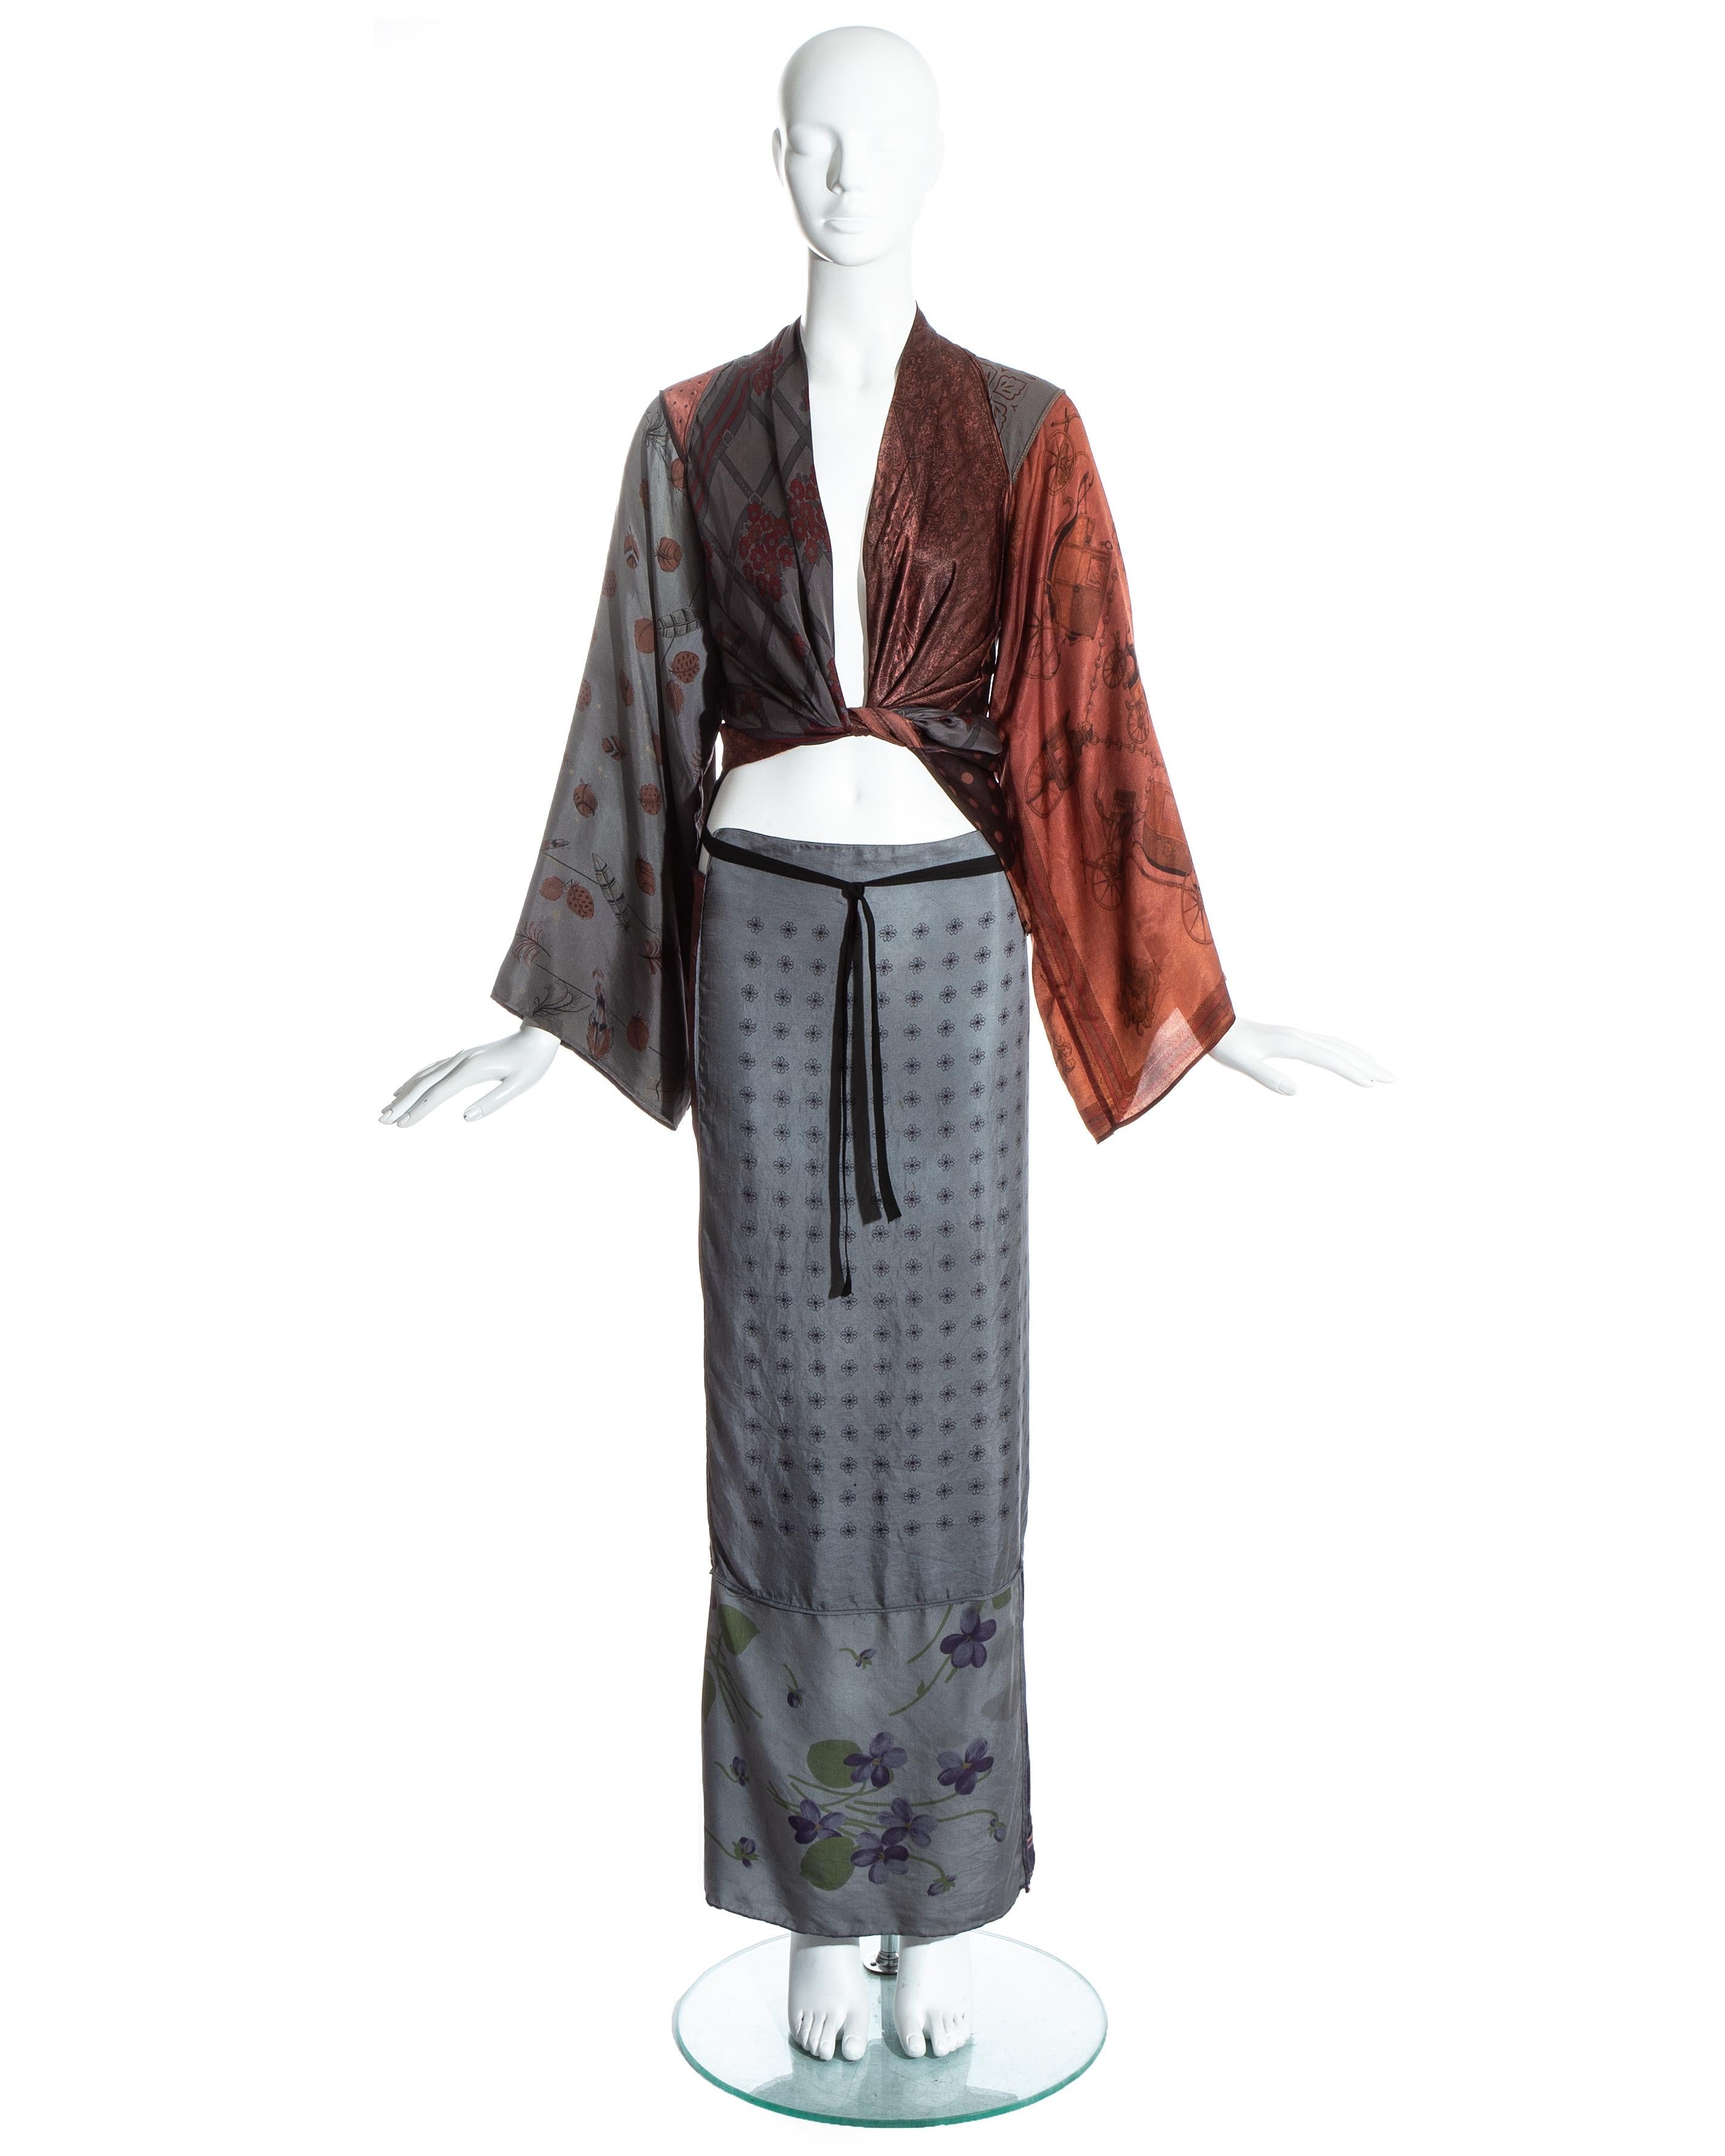 Martin Margiela; Artisanal ensemble made from a patchwork of vintage silk scarves. Maxi wrap skirt with black cotton ribbon fastening. Halter wrap blouse with wide cut sleeves.   

Spring-Summer 1992  (From the “Retrospective collection”,